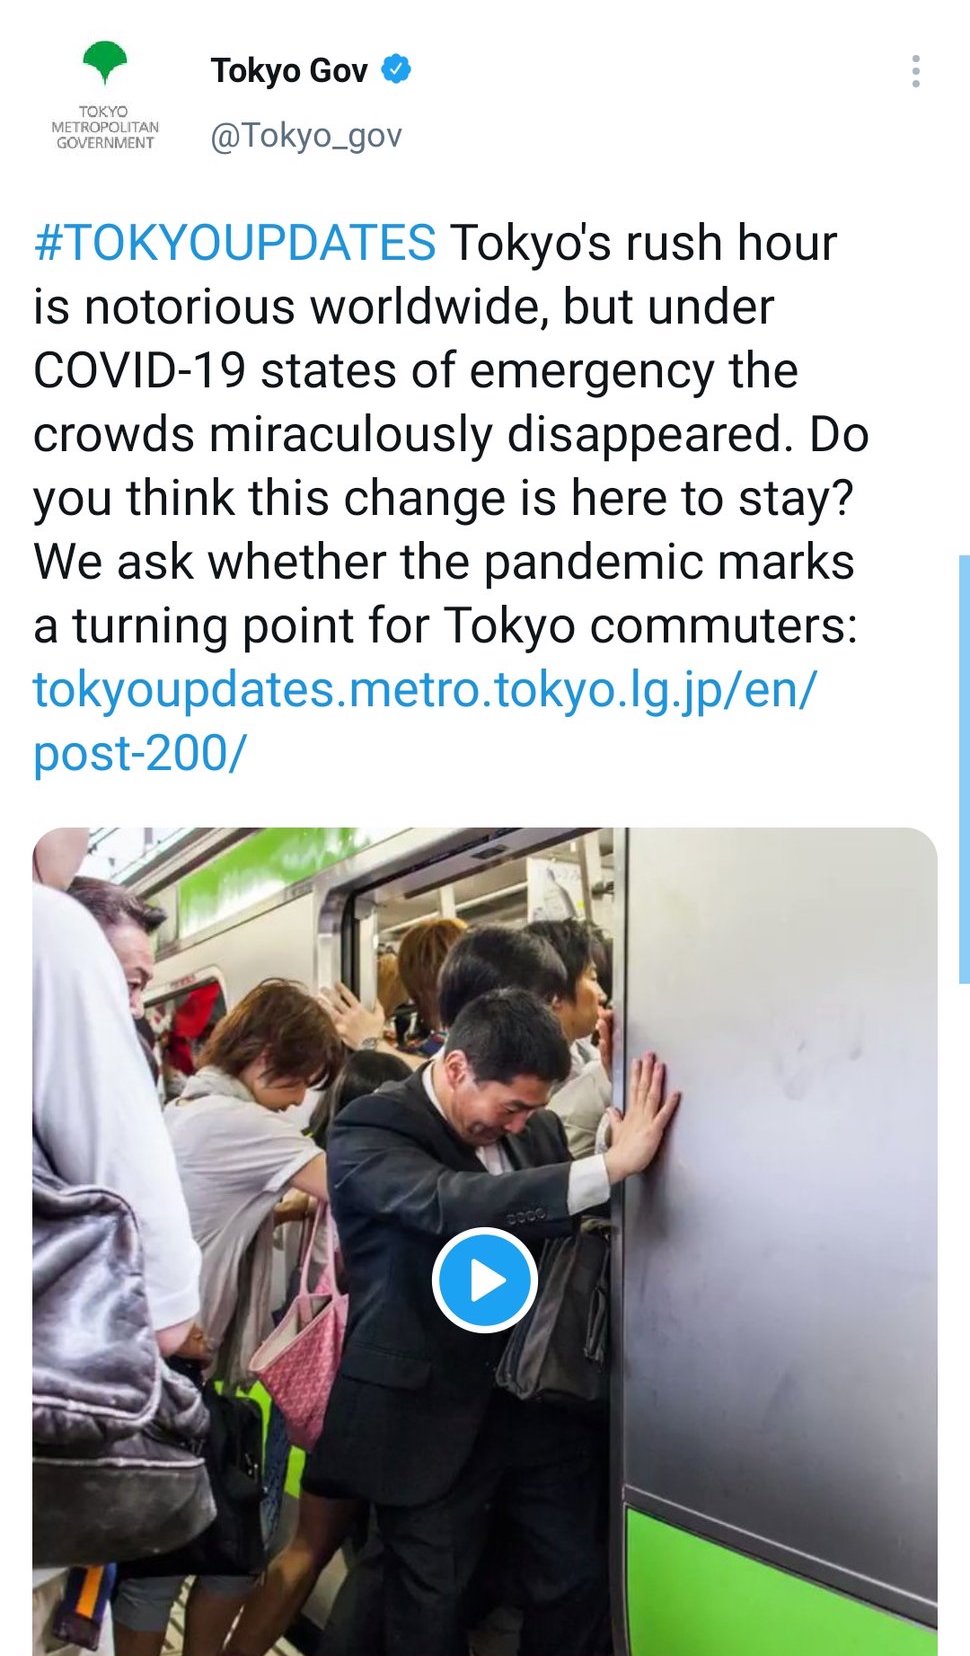 Tokyo's rush hour is notorious worldwide, but under COVID-19 states of emergency the crowds miraculously disappeared. Do you think this change is here to stay? We ask whether the pandemic marks a turning point for Tokyo commuters: